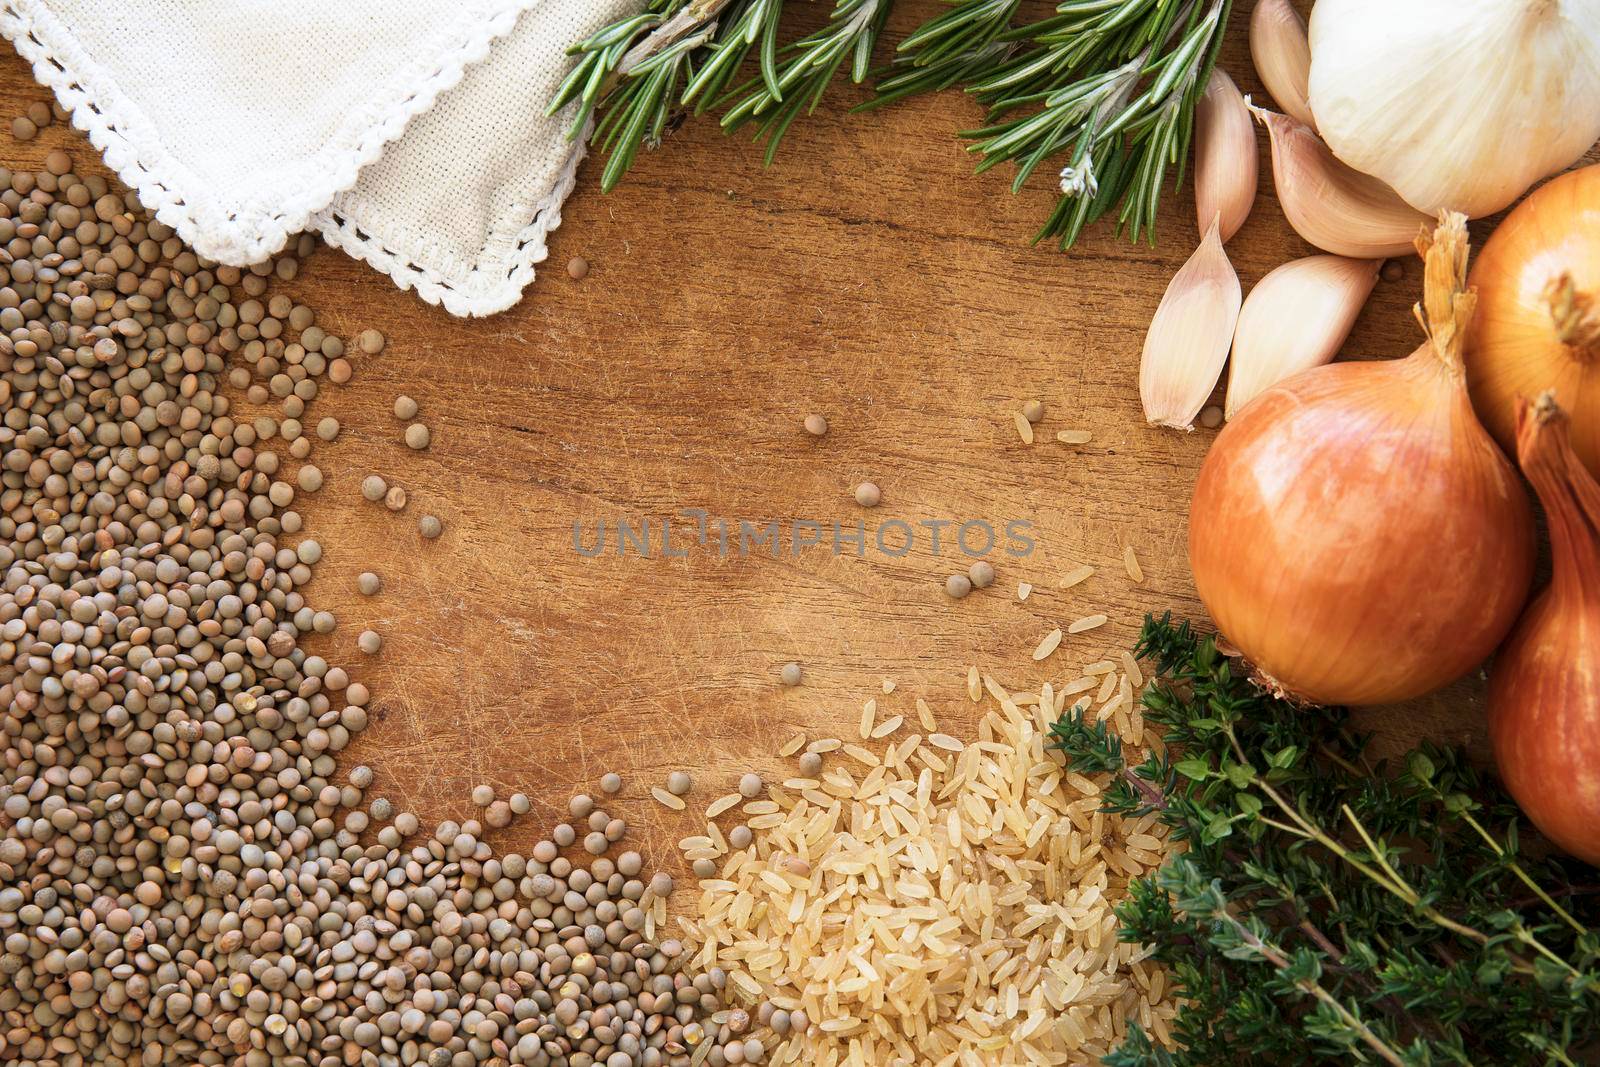 Healthy food frame with fresh vegetables, herbs and grains on rustic wooden background viewed from above.